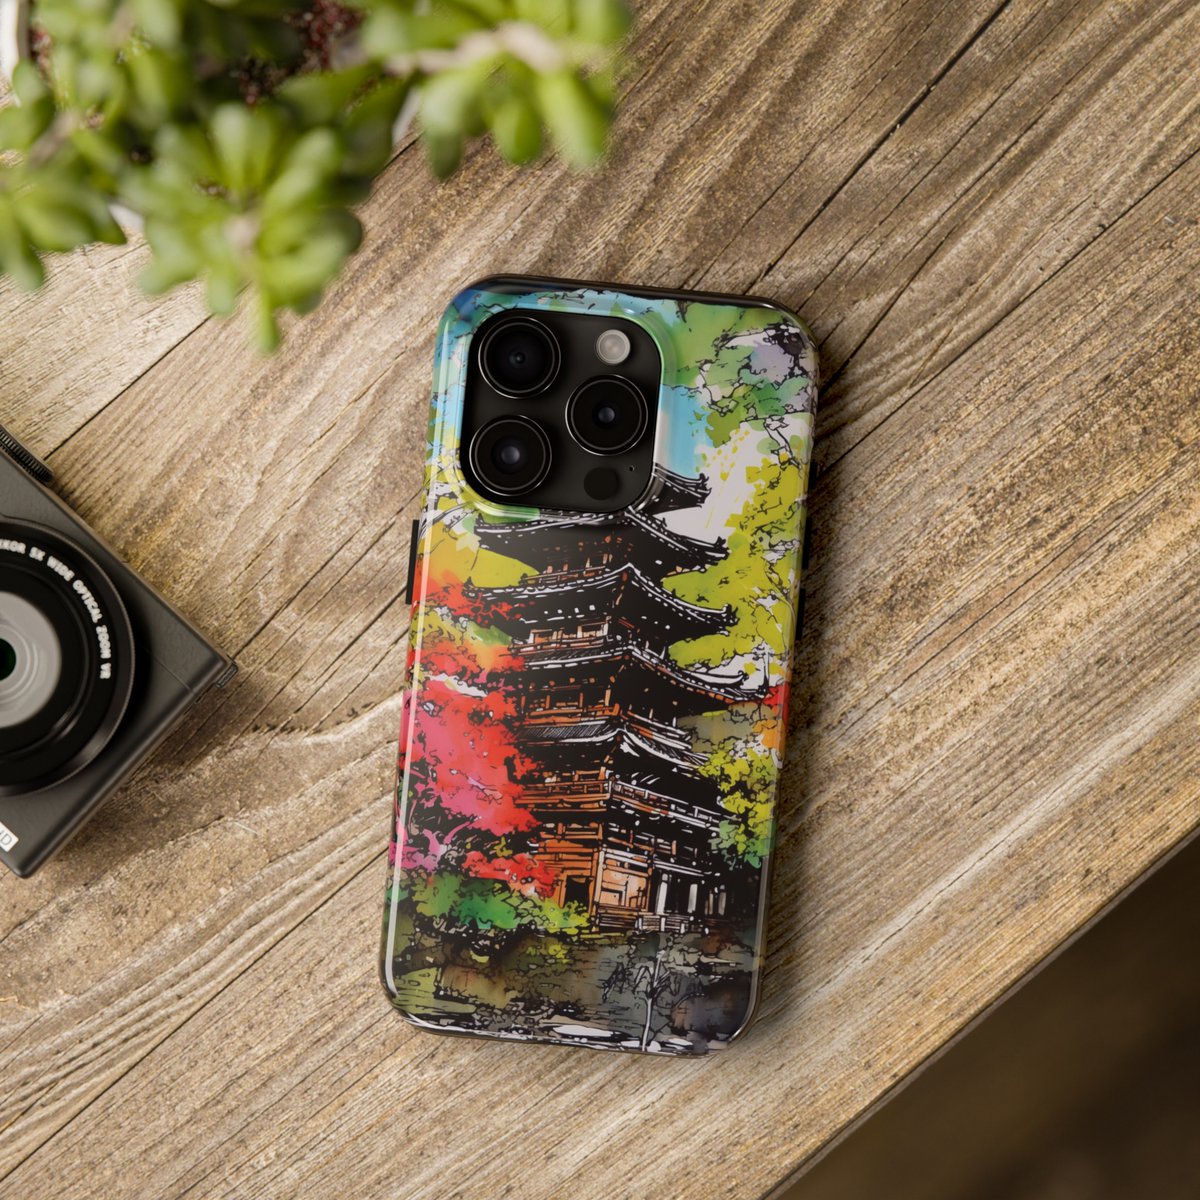 Japanese Temple phone case for iPhone - Link in Bio!

#phonecase #iphonecase #aestheticphonecase
#iphone11case #iphone12case #iphone13case #iphone14case
#japanese #japaneseart #JapaneseCulture #japanesefashion #japanesephonecase #japanlife #japantravel #japantrip